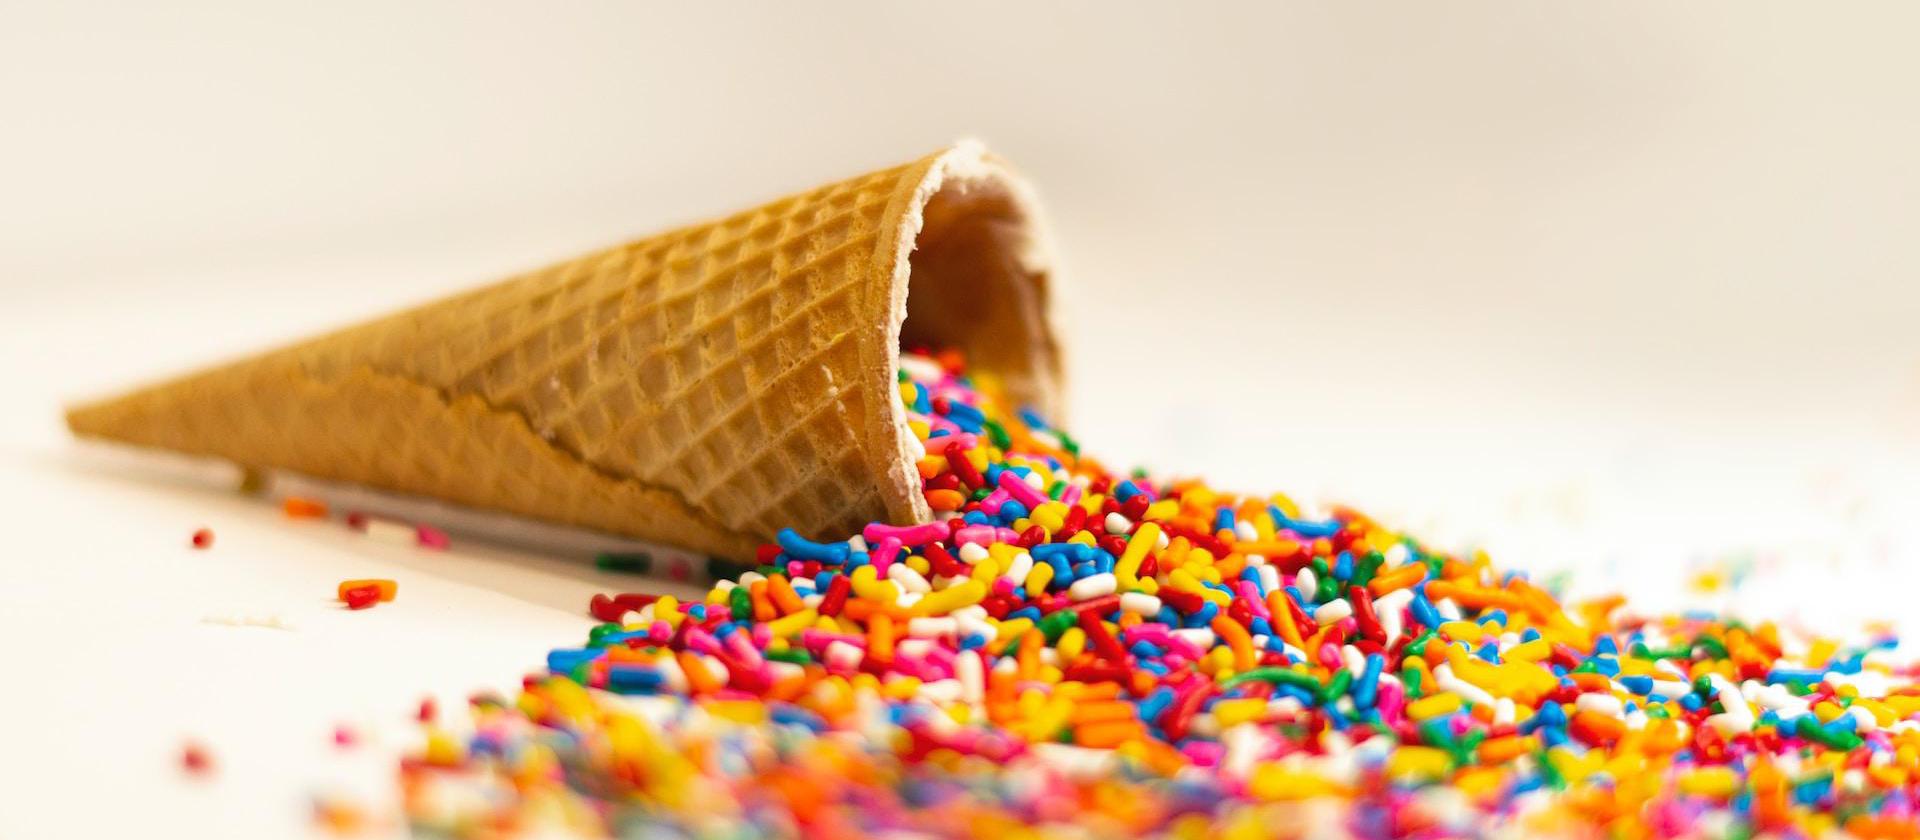 an ice cream cone filled with sprinkles and colored sprinkles